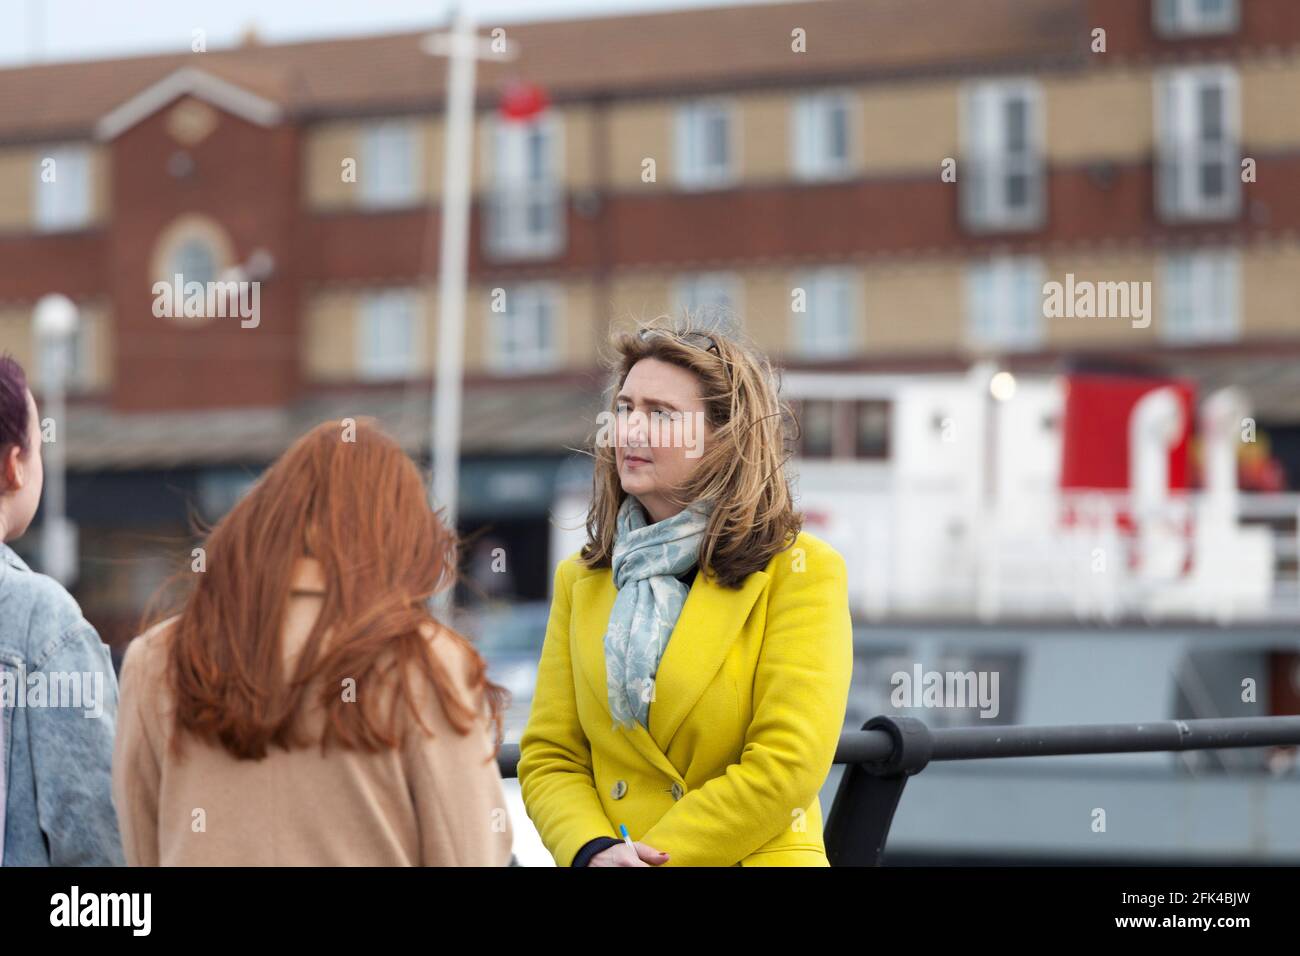 Hartlepool,UK. 28th April 2021. BBC presenter,Victoria Derbyshire, at the Hartlepool Marina today canvassing opinions ahead of the local bi-election next week. David Dixon / Alamy Stock Photo